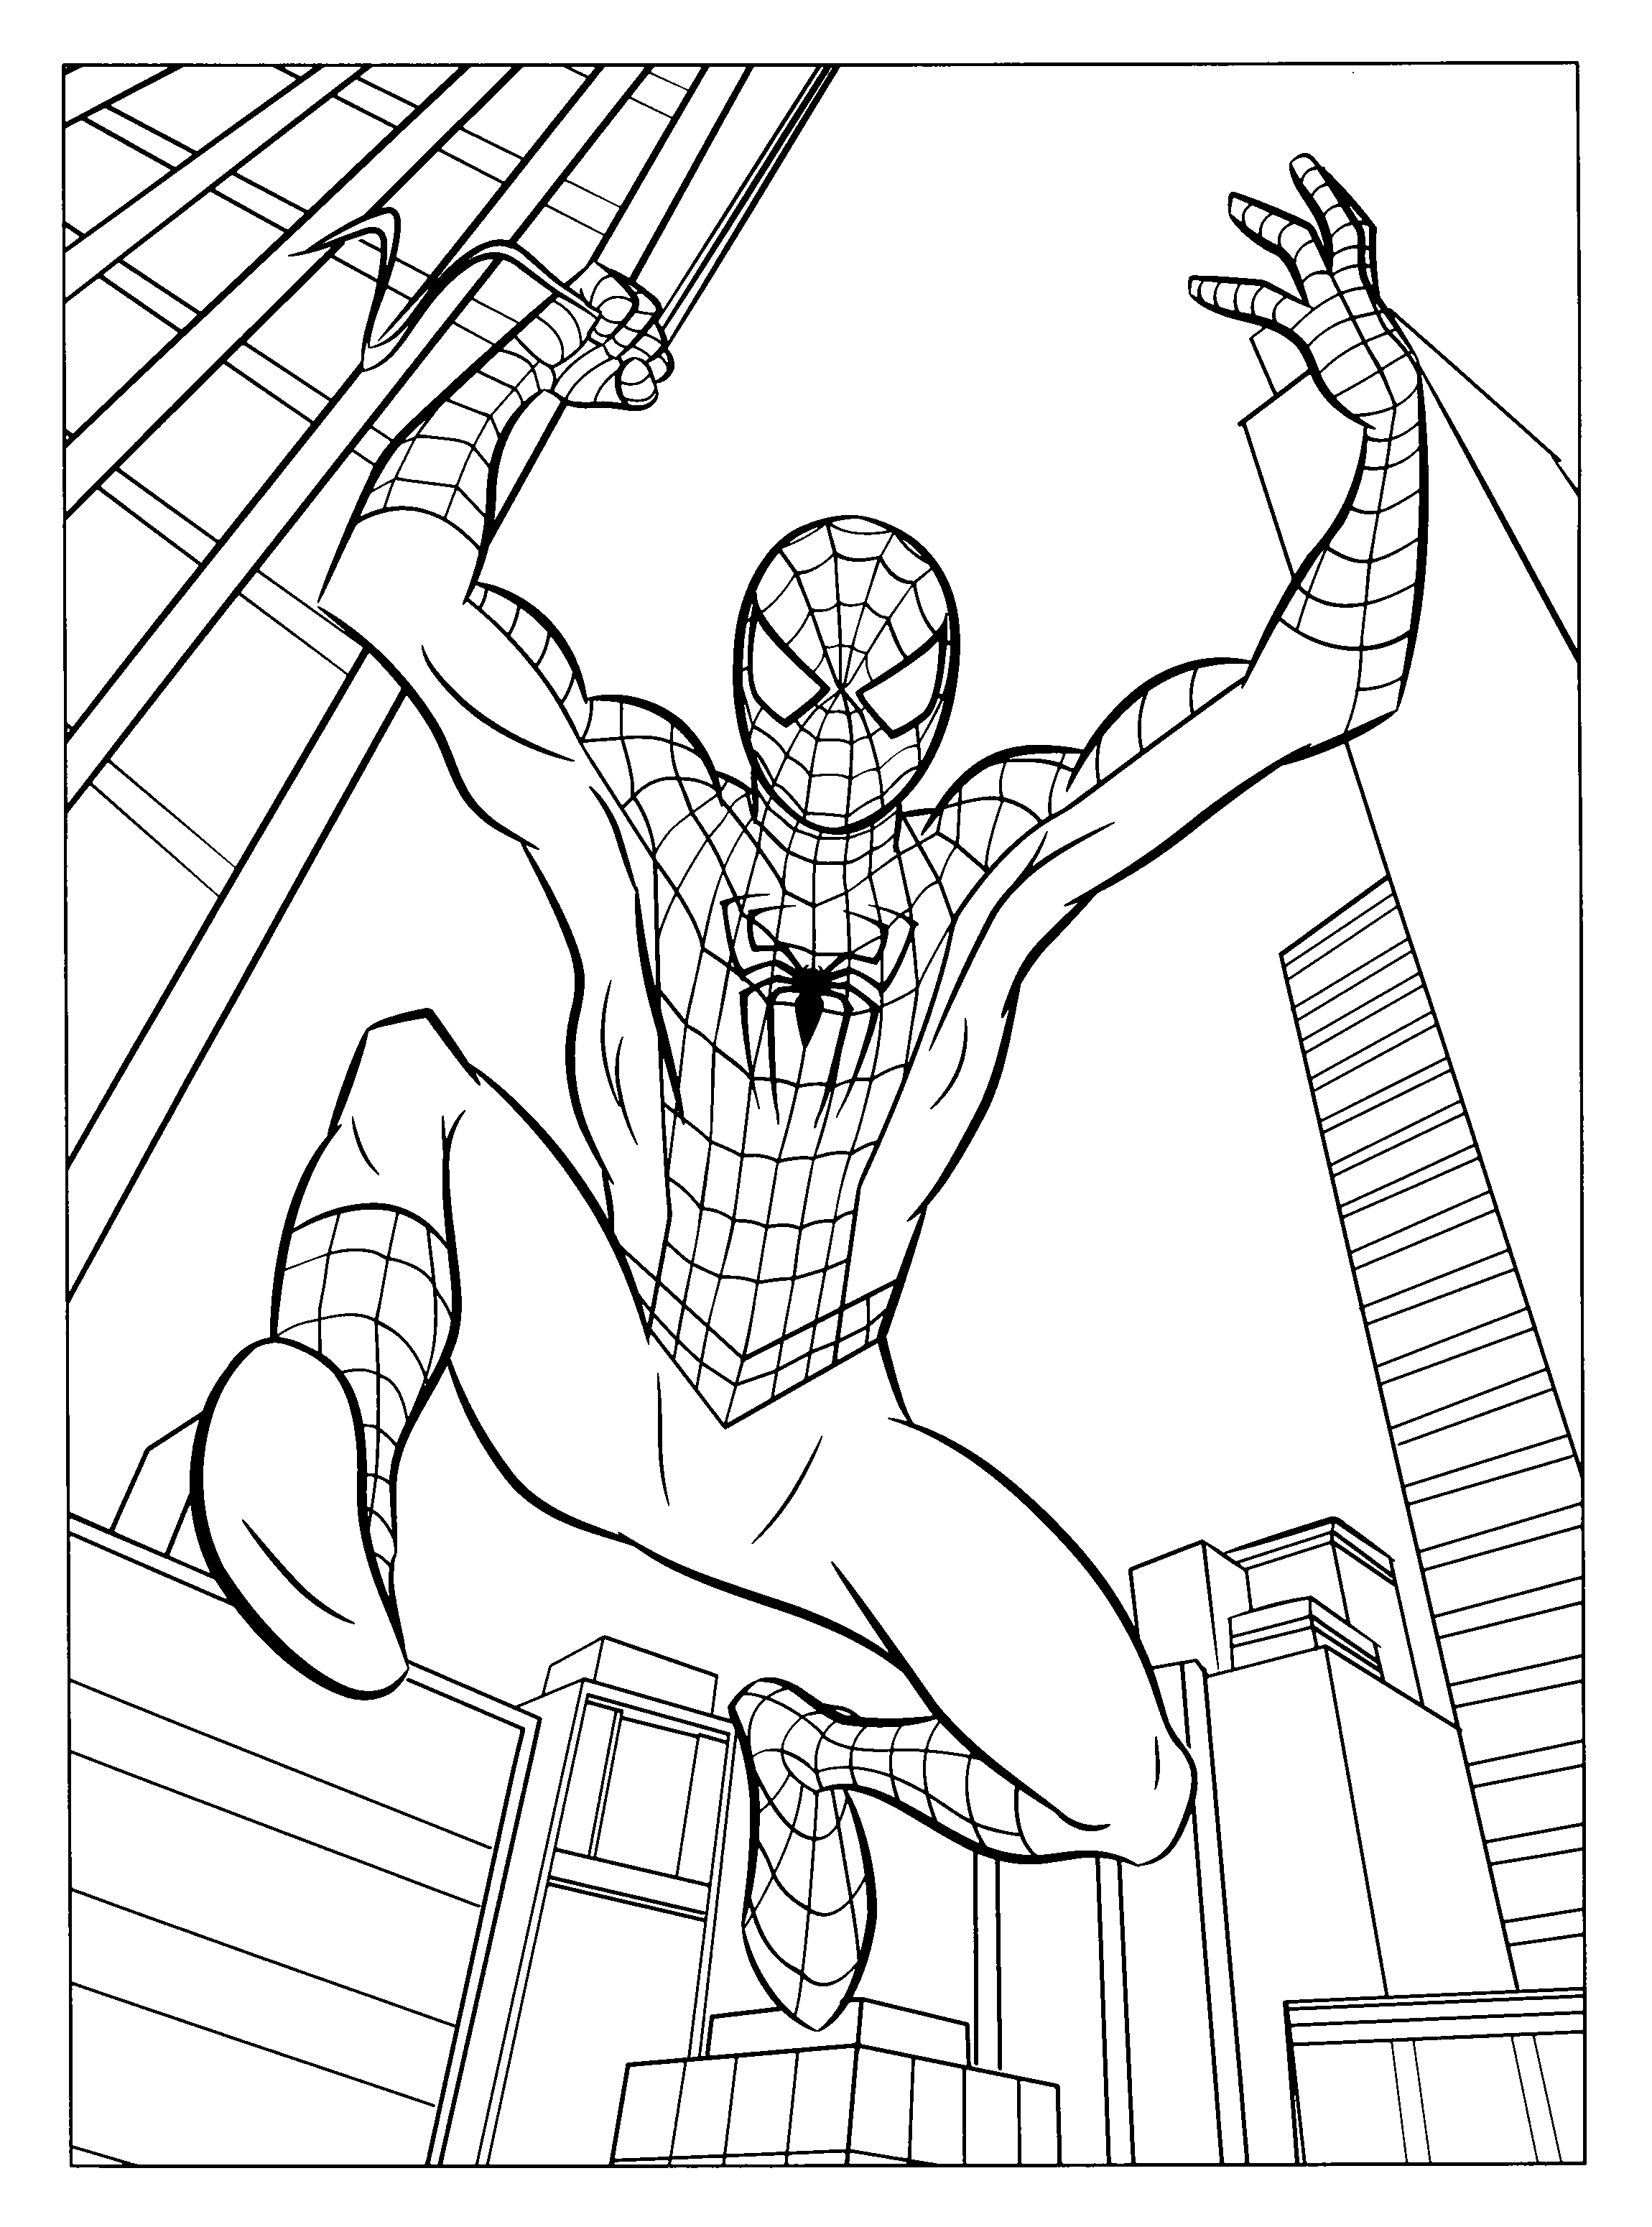 Spider man jumps in the middle of buildings